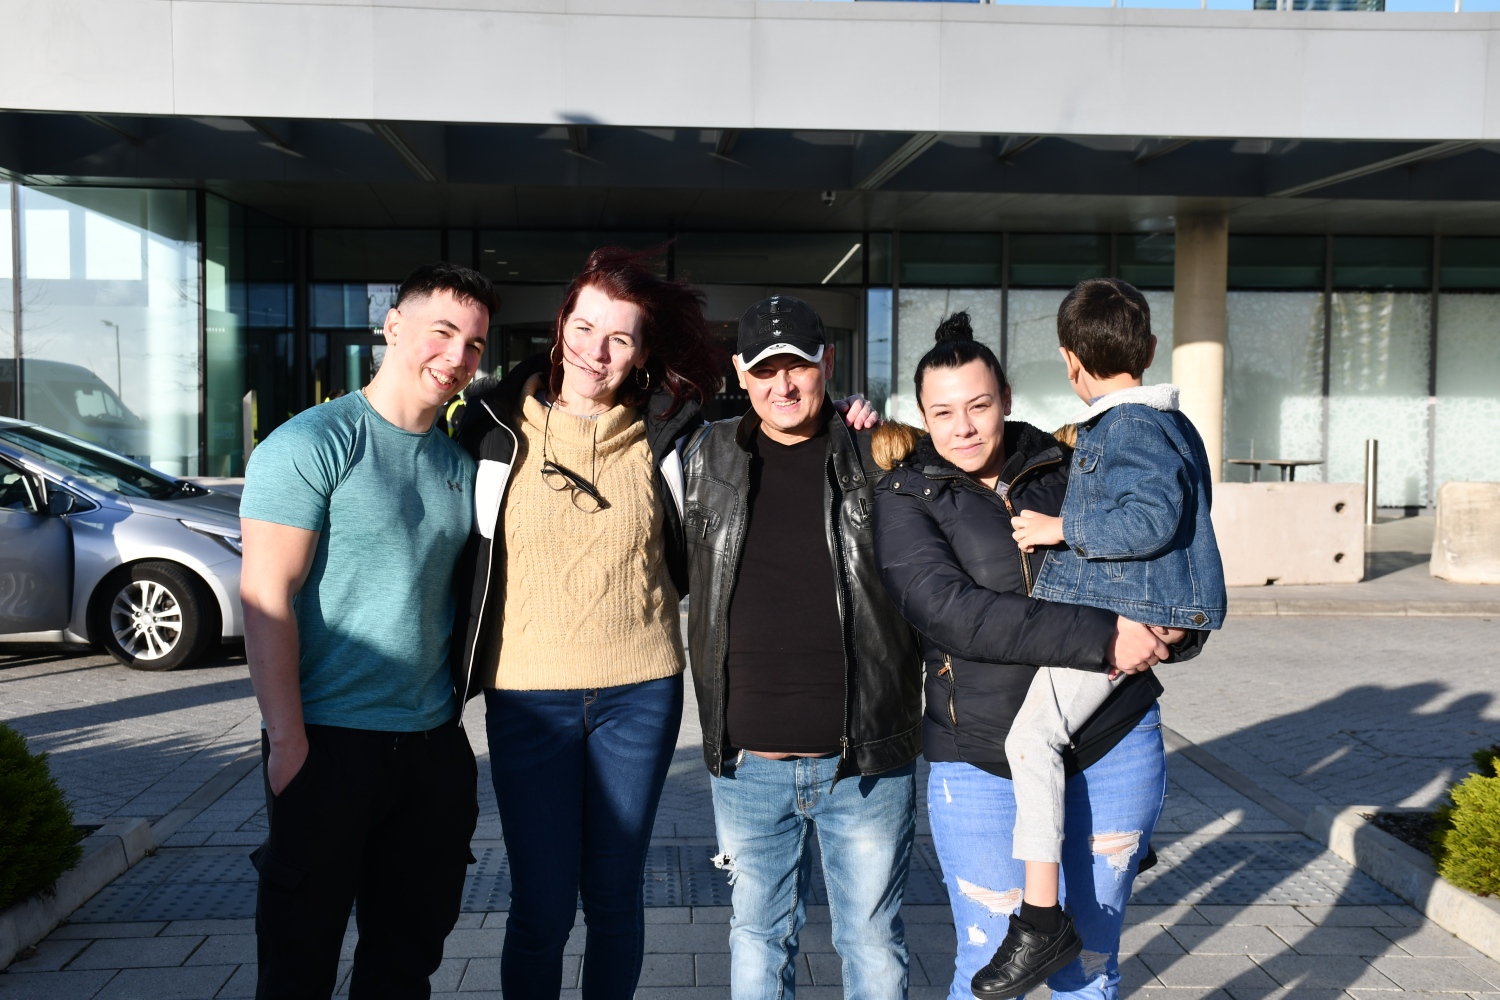 Four people and a child standing outside a hospital, smiling.